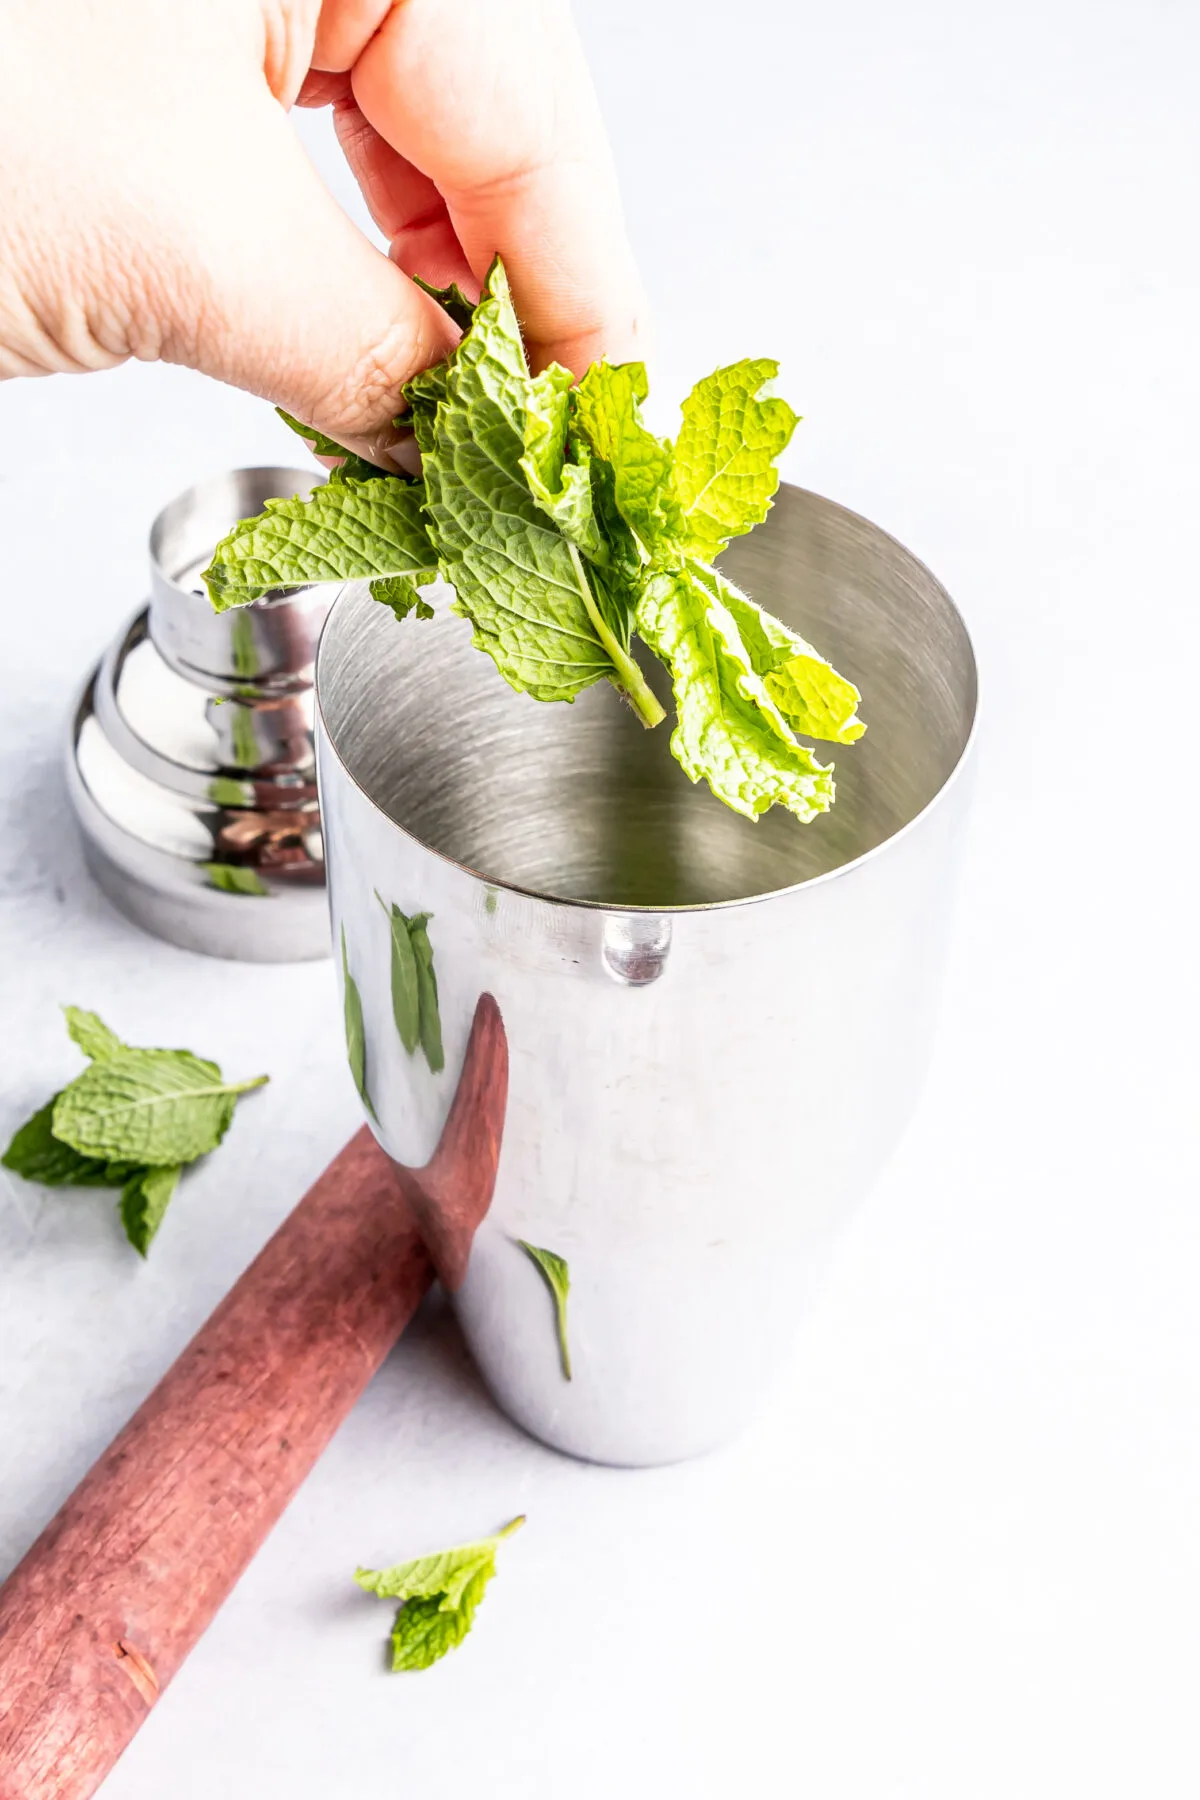 Putting mint into a cocktail shaker.